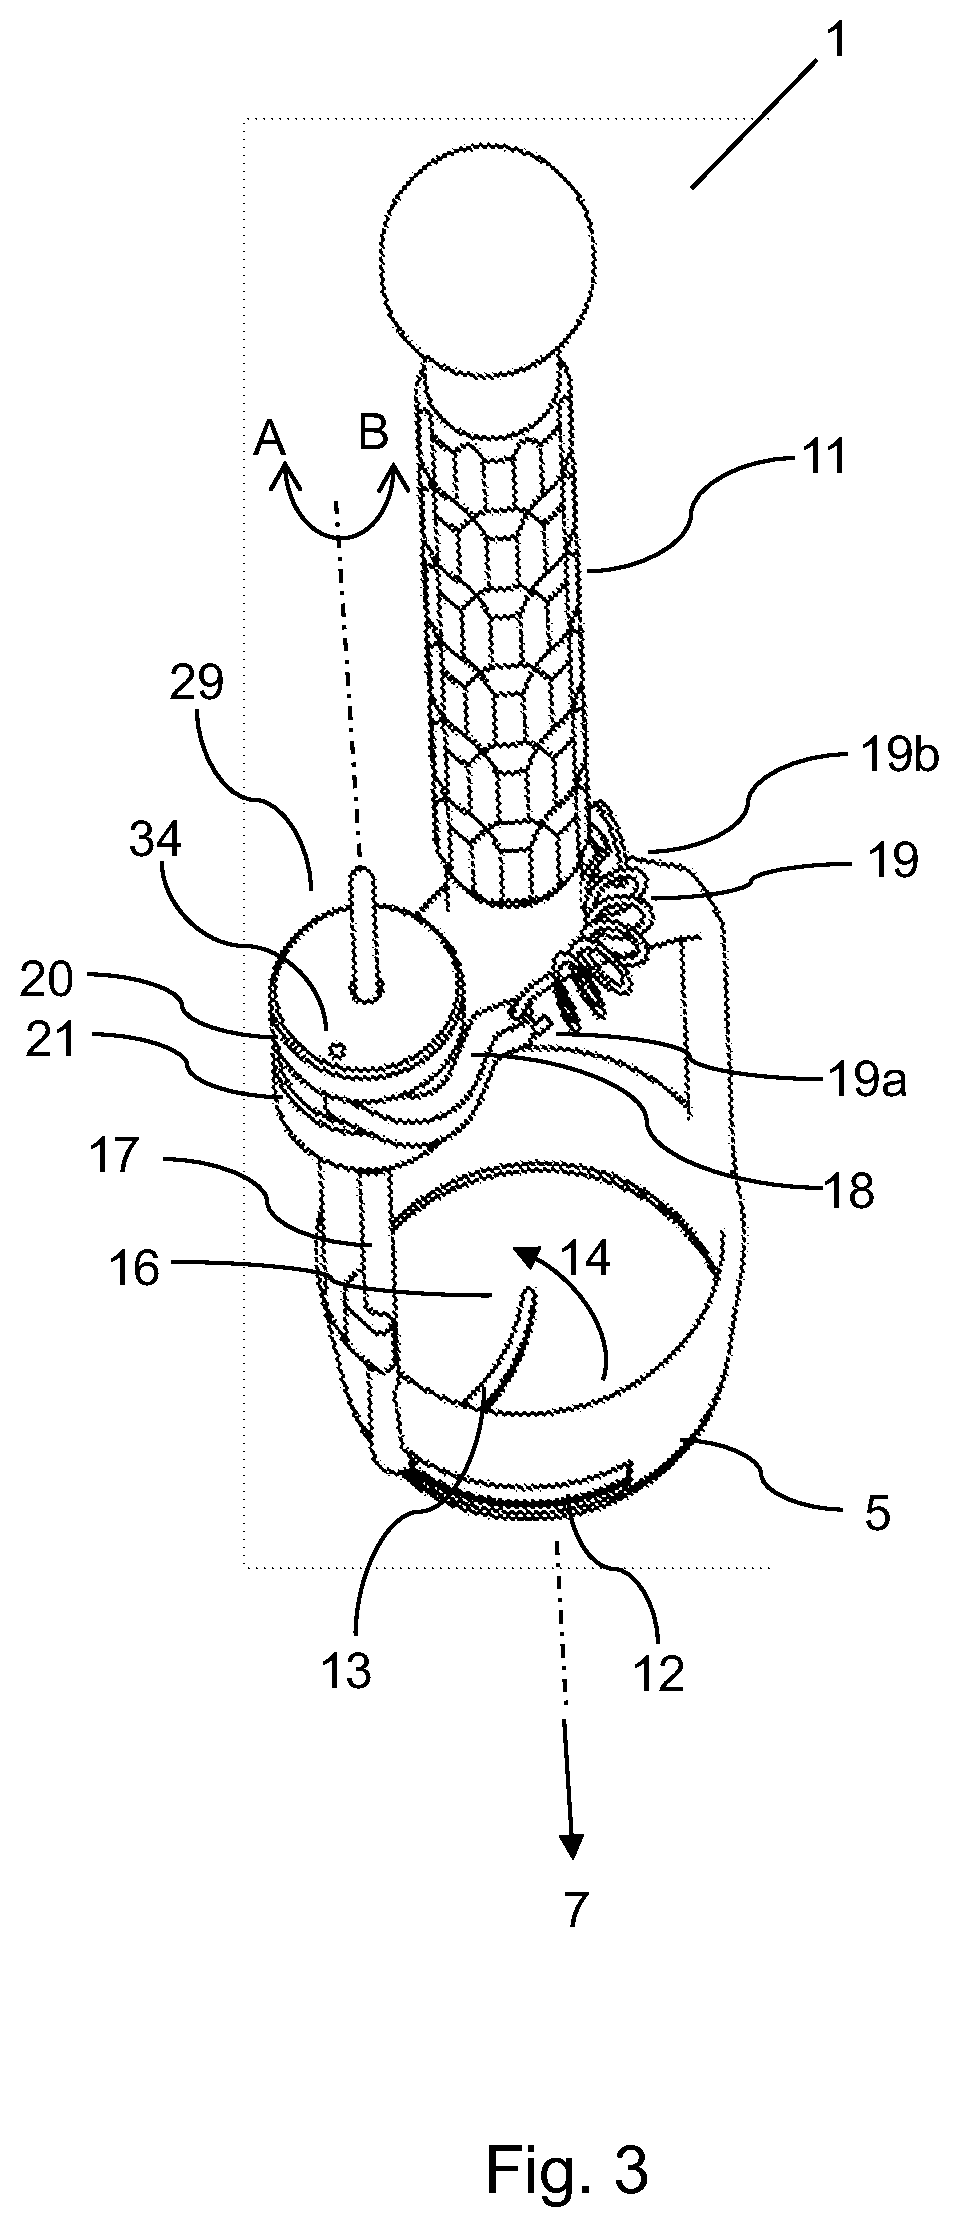 Surgical cutting apparatus for removal of a tumour from human tissue